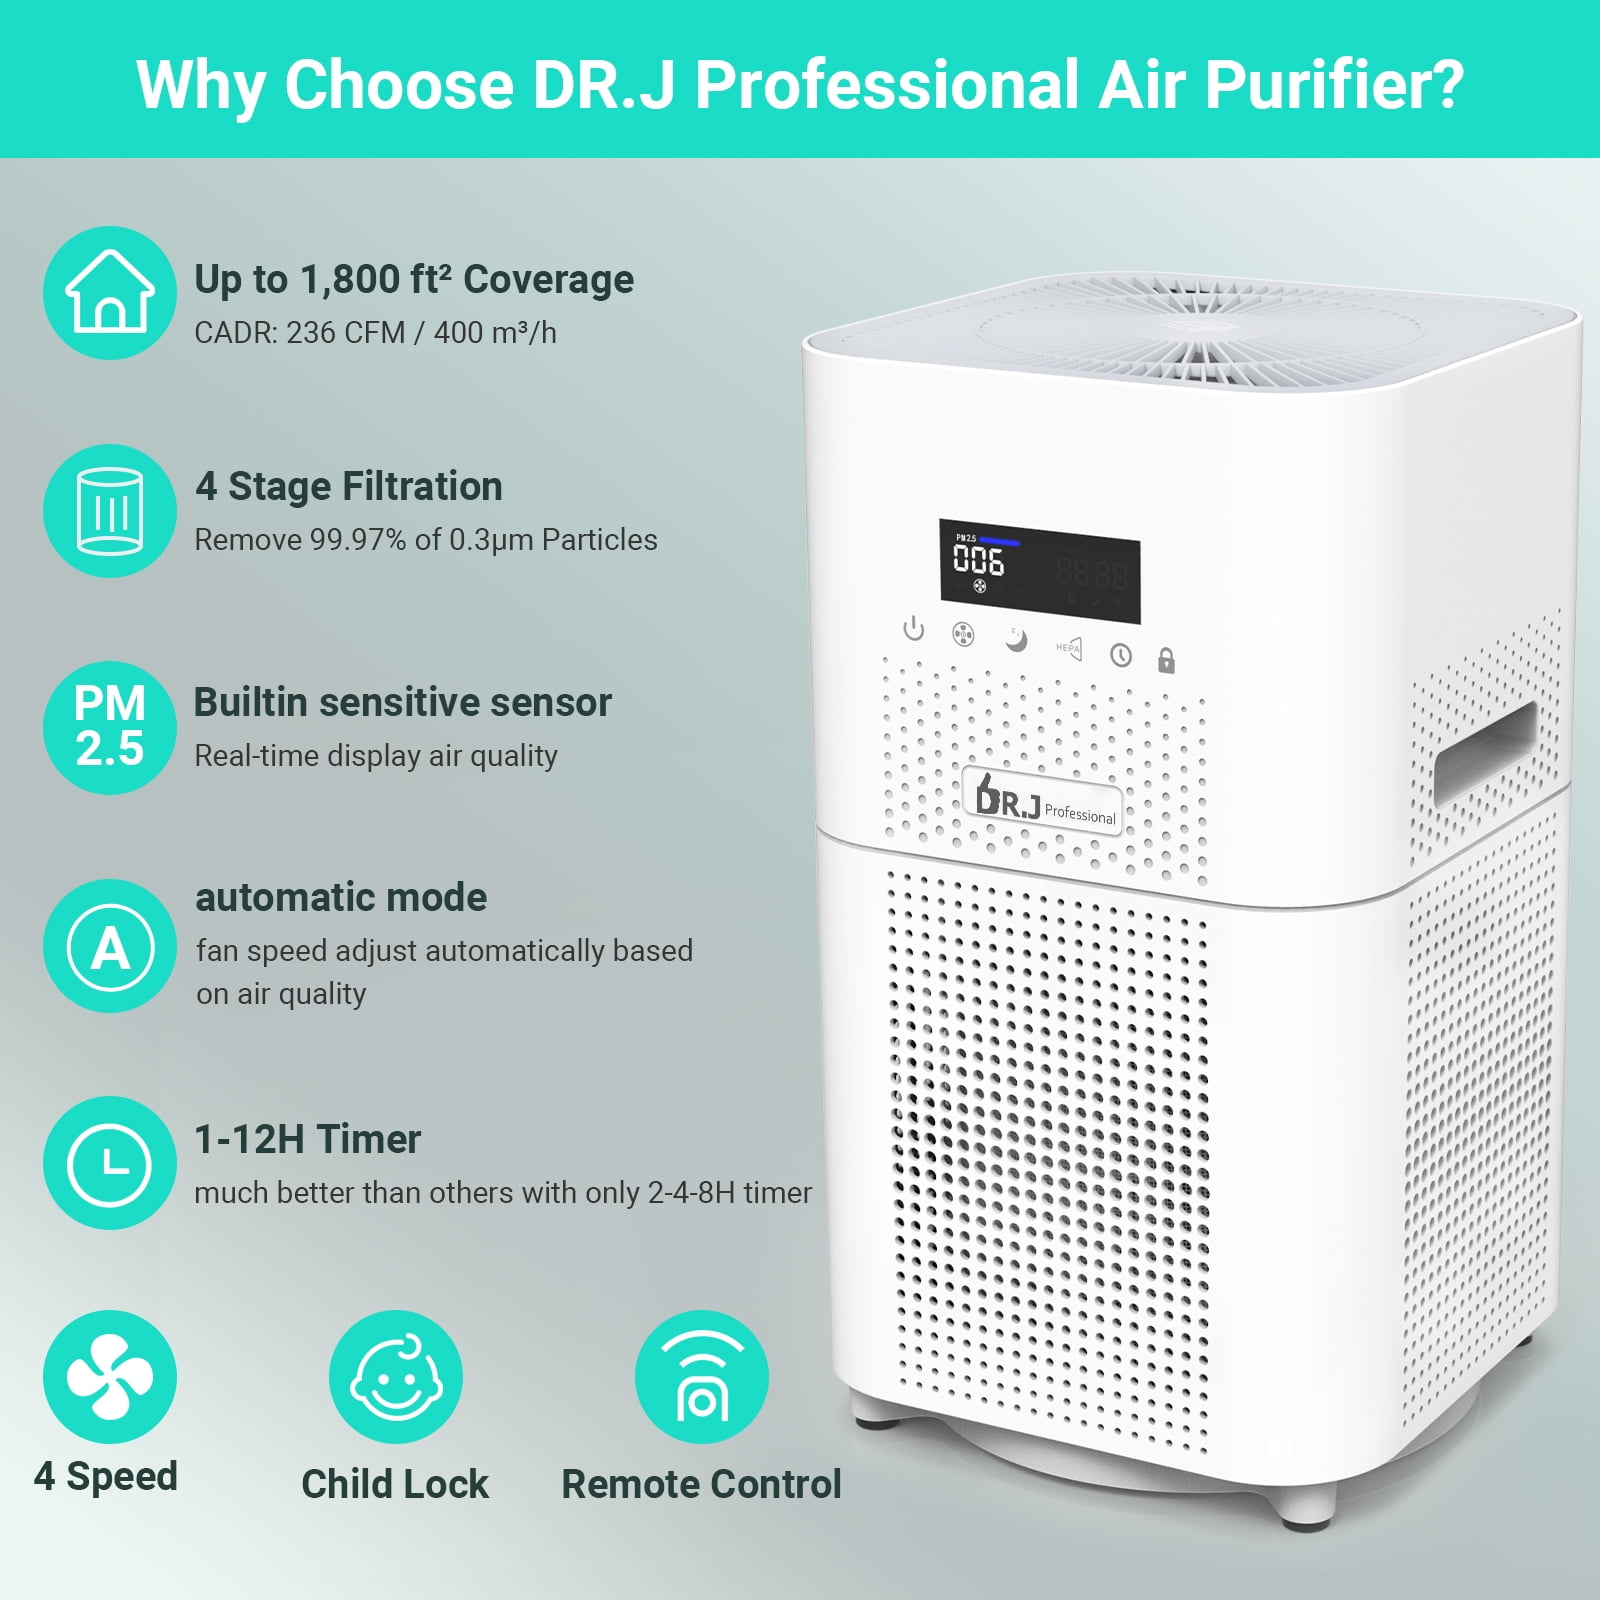 LEVOIT Air Purifiers for Large Room, 1076 ft² Coverage, H13 True